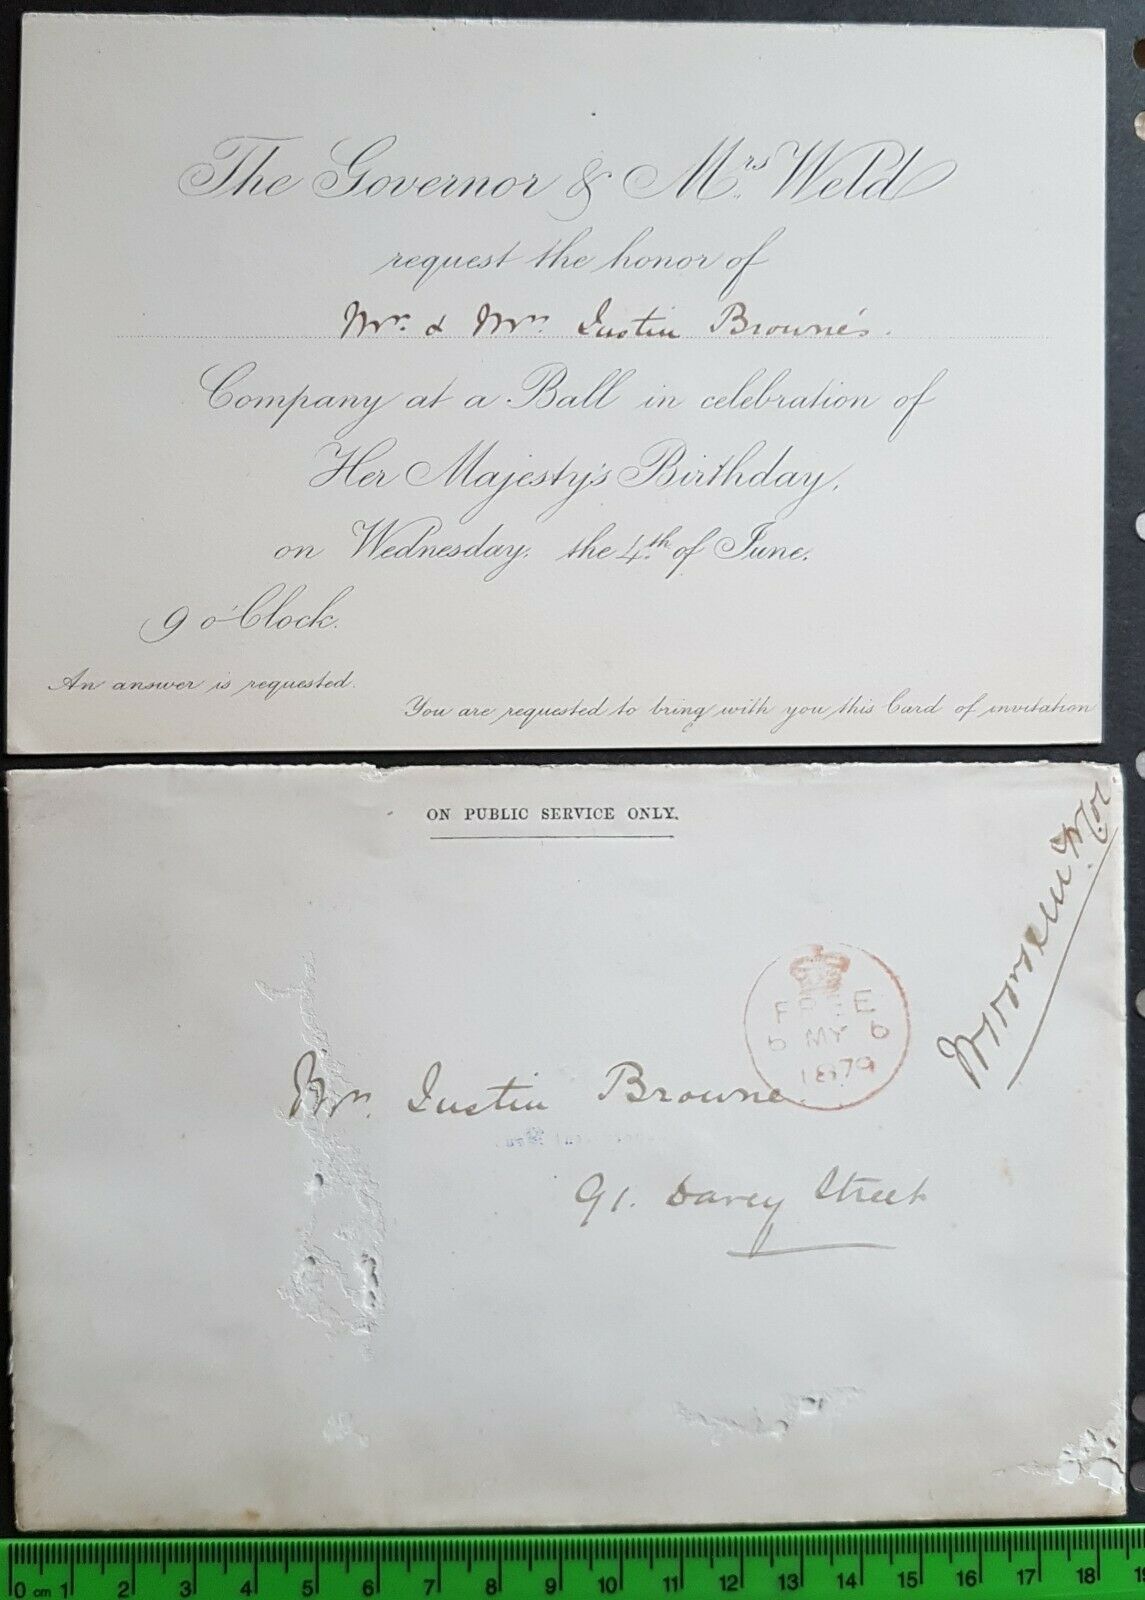 Tasmania 1879 "FREE" Frank + invitation from Governor to Queen's Birthday Ball